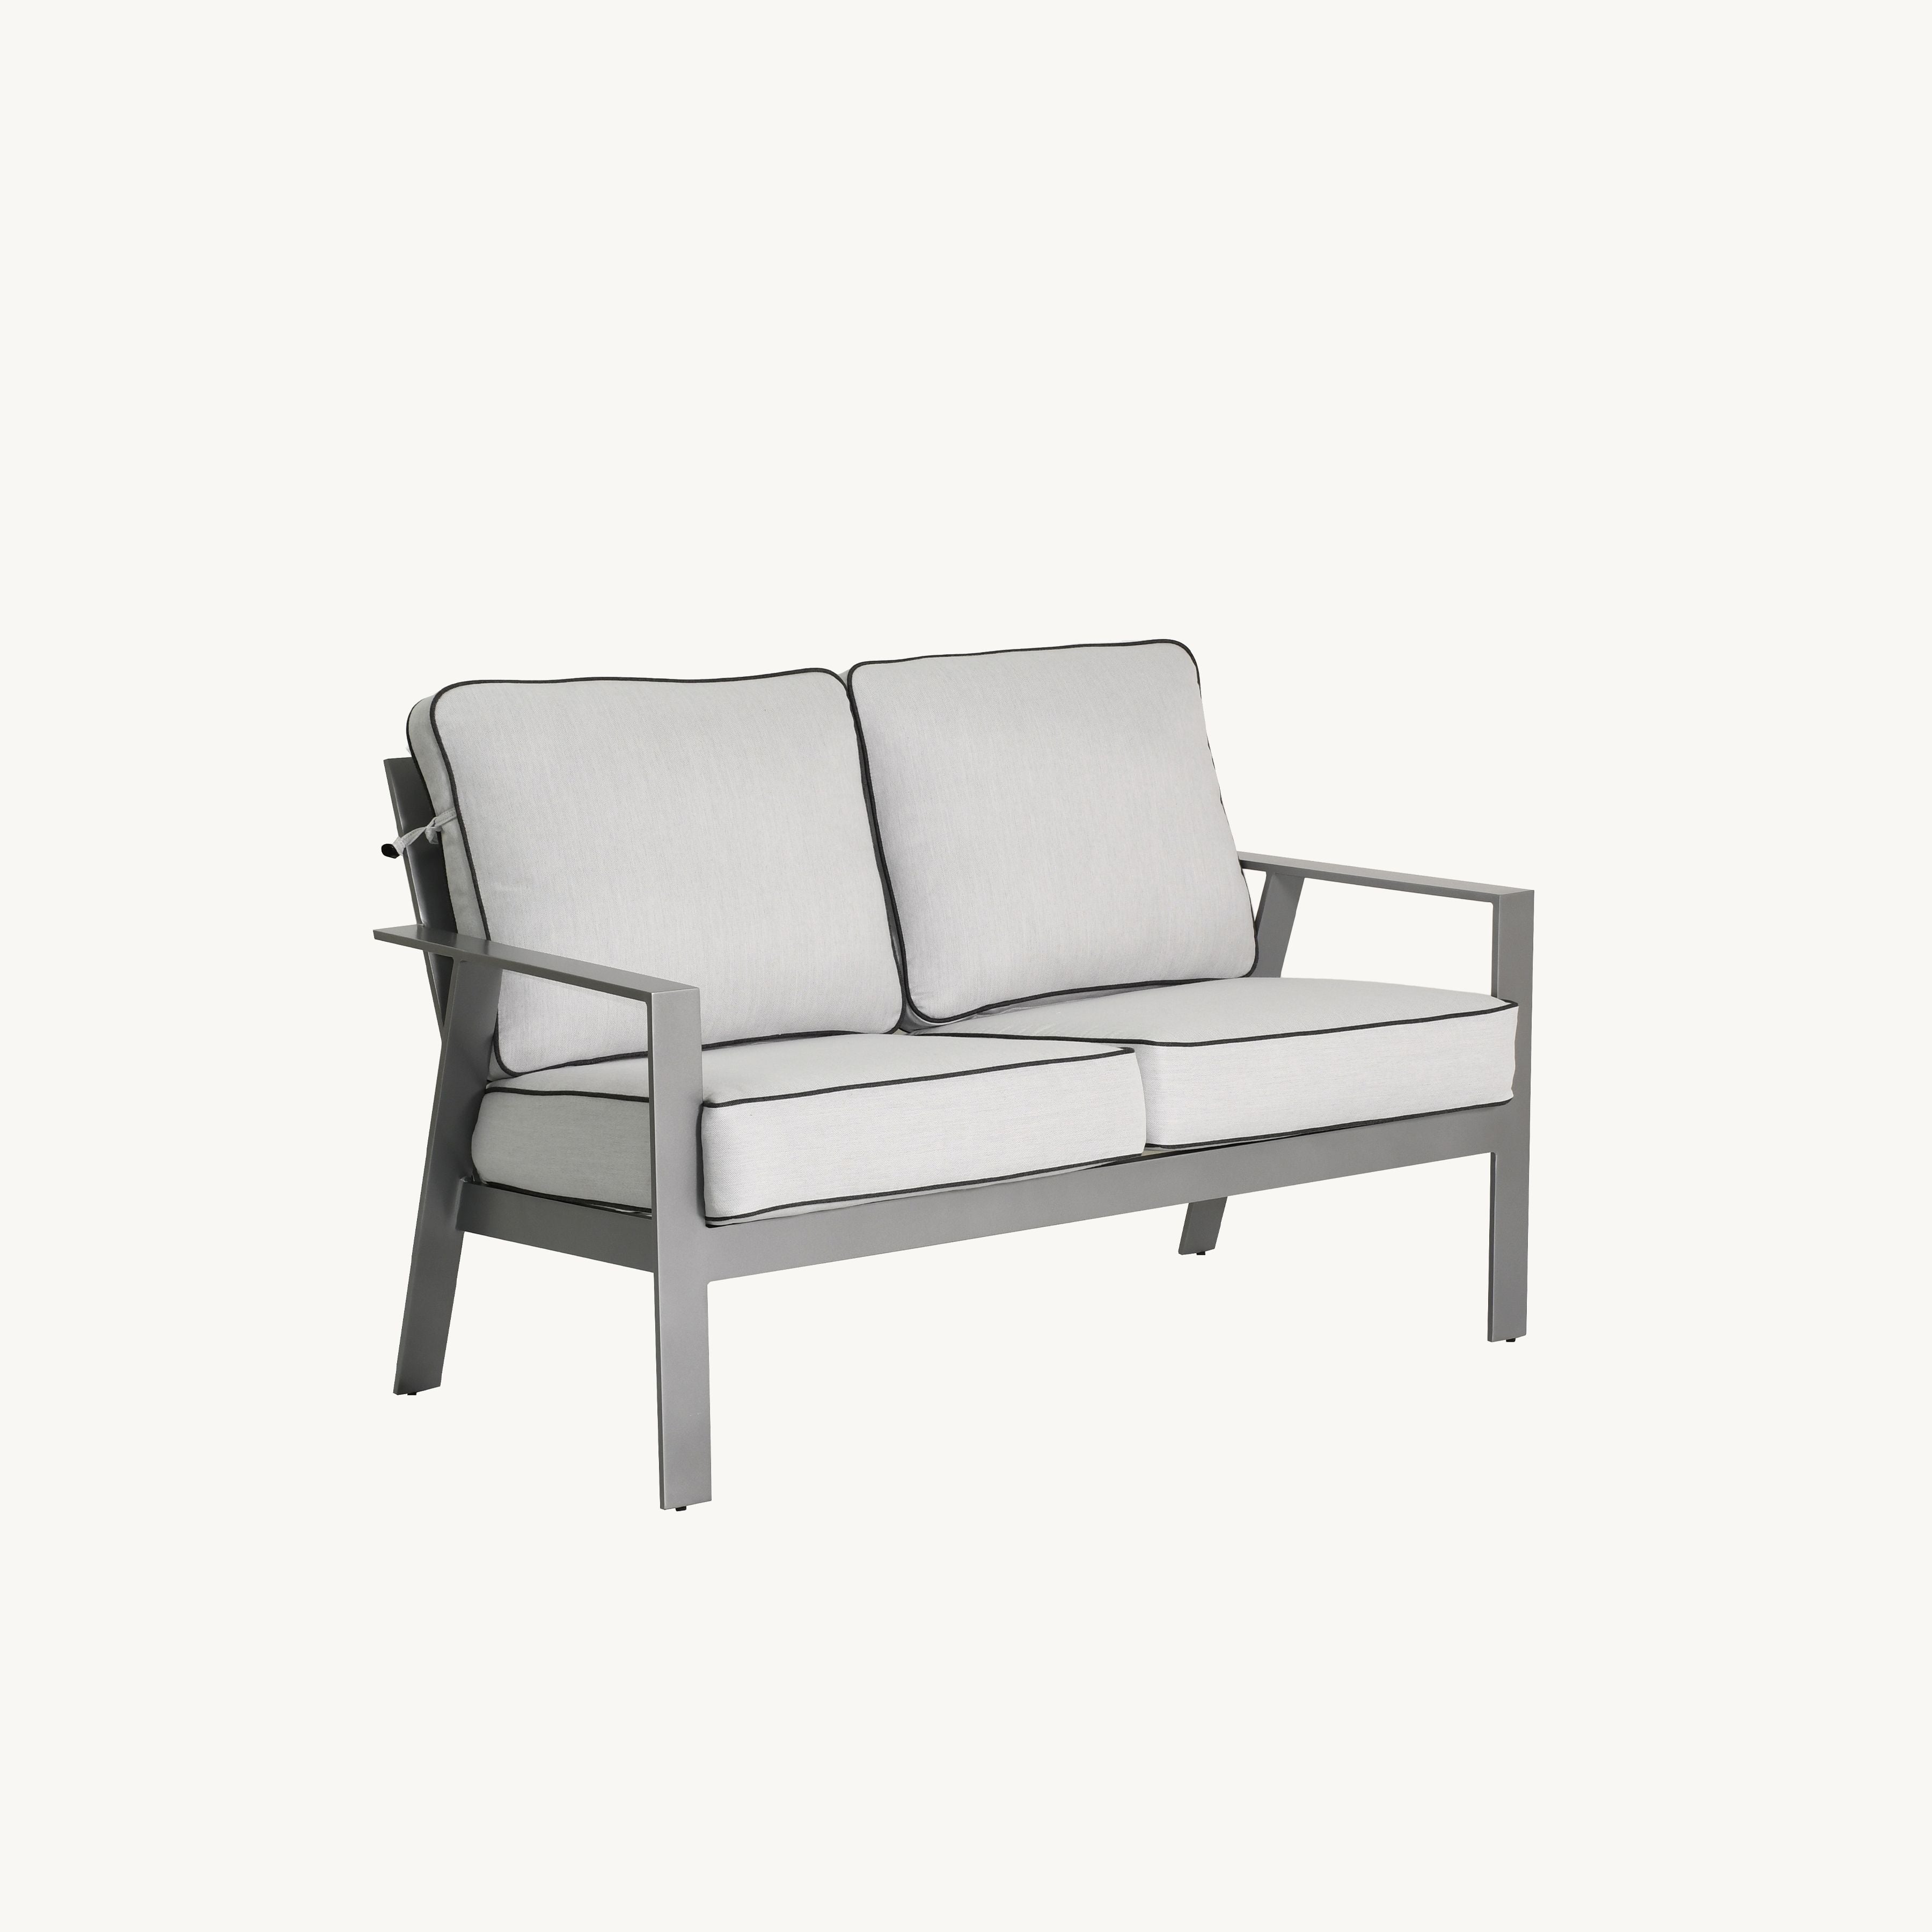 Trento Cushioned Loveseat By Castelle